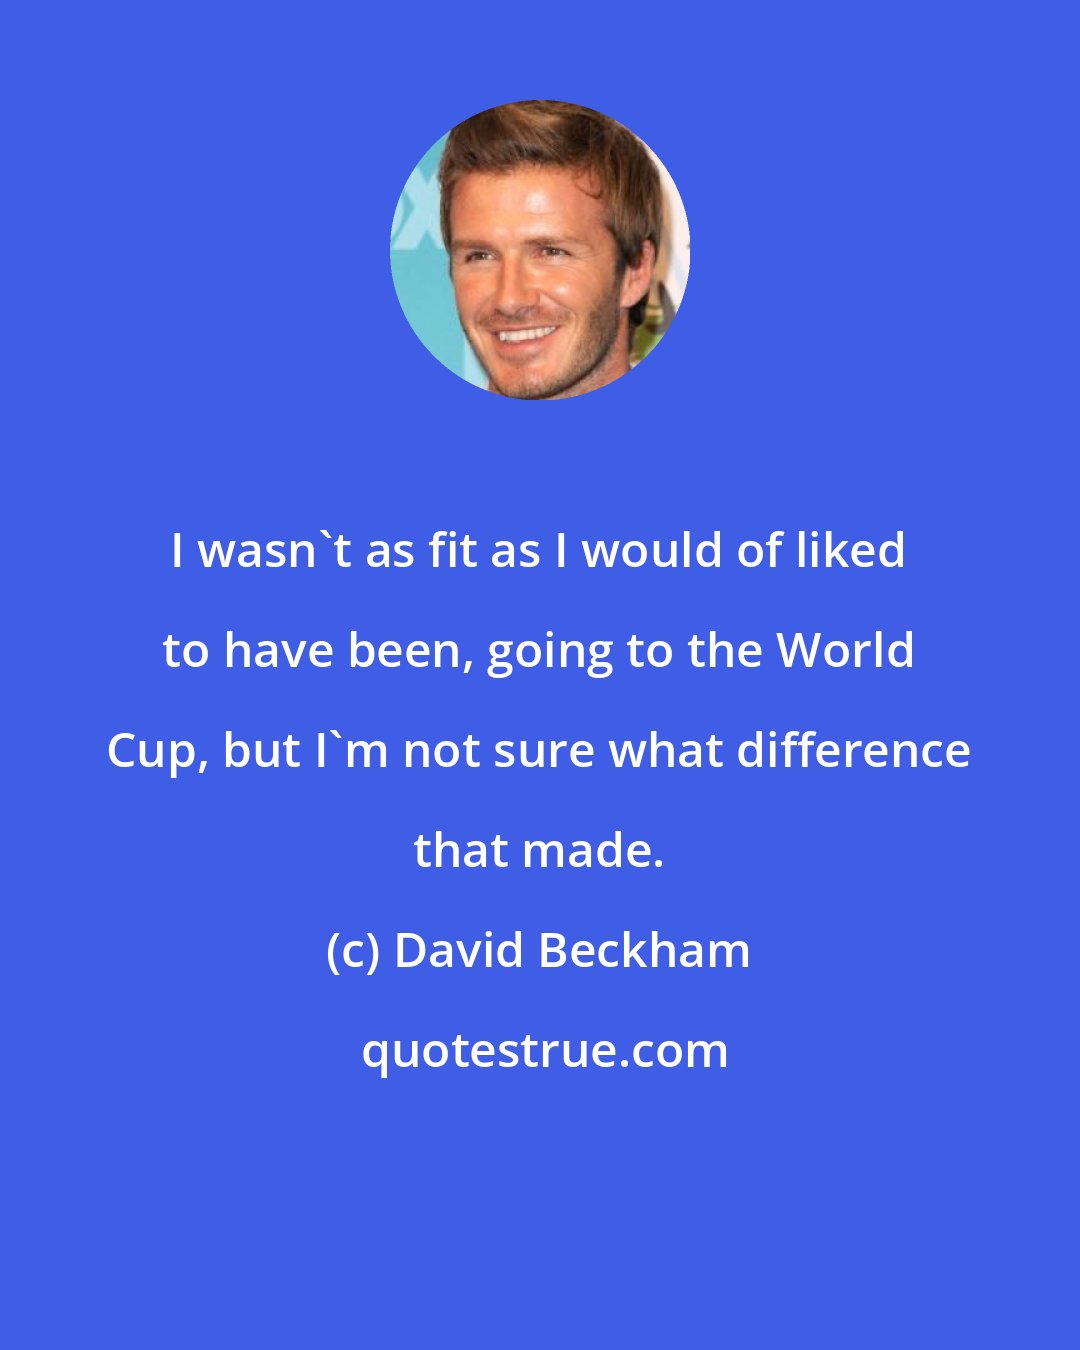 David Beckham: I wasn't as fit as I would of liked to have been, going to the World Cup, but I'm not sure what difference that made.